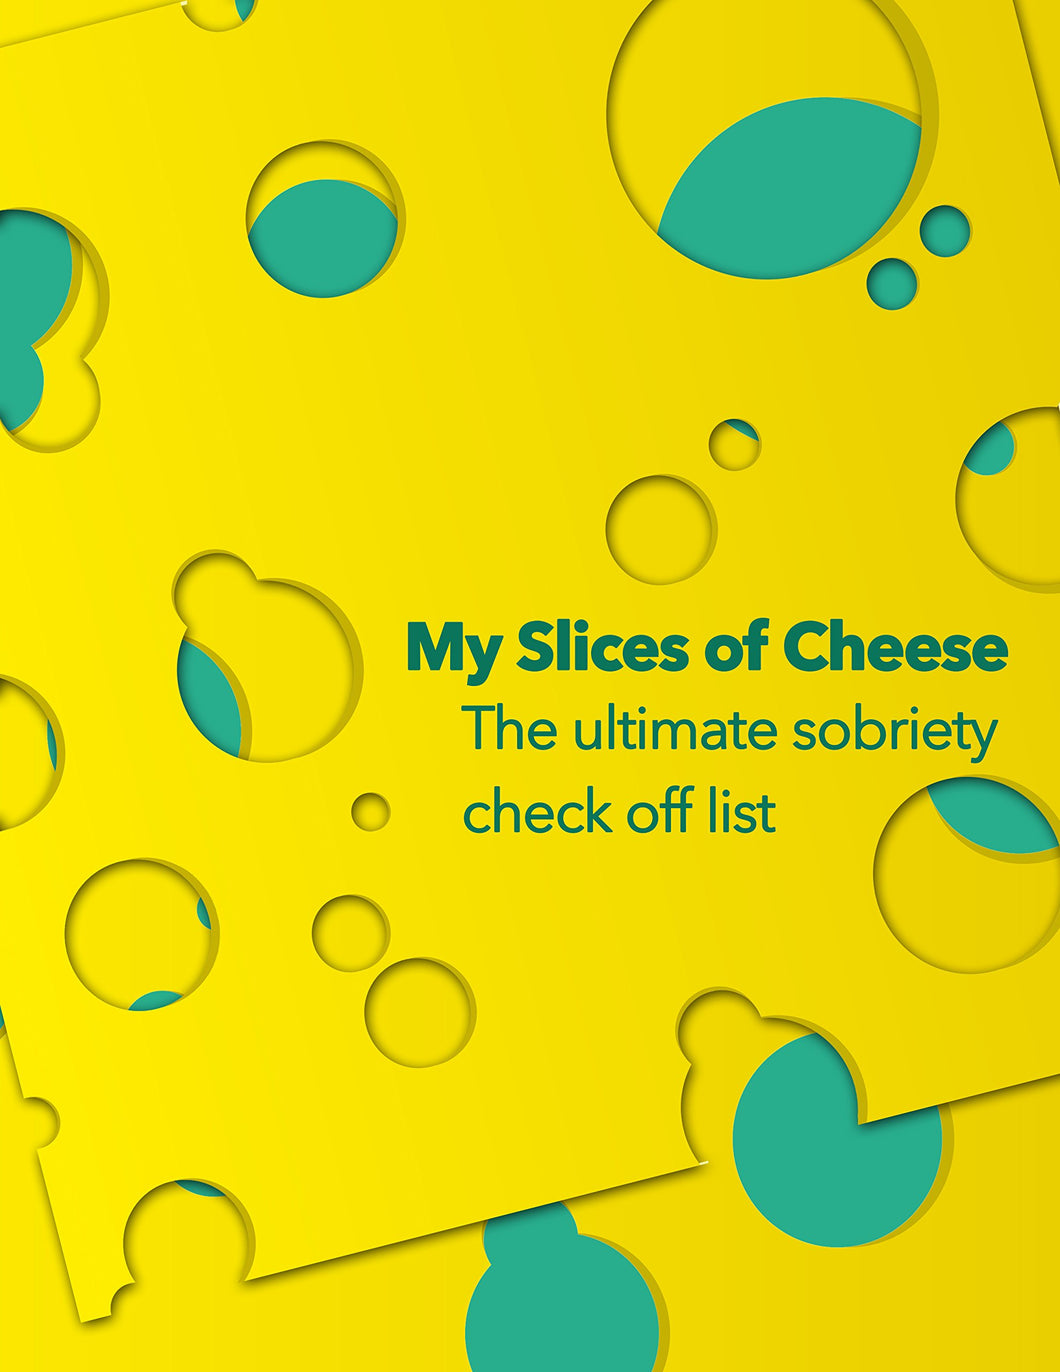 My Slices of Cheese